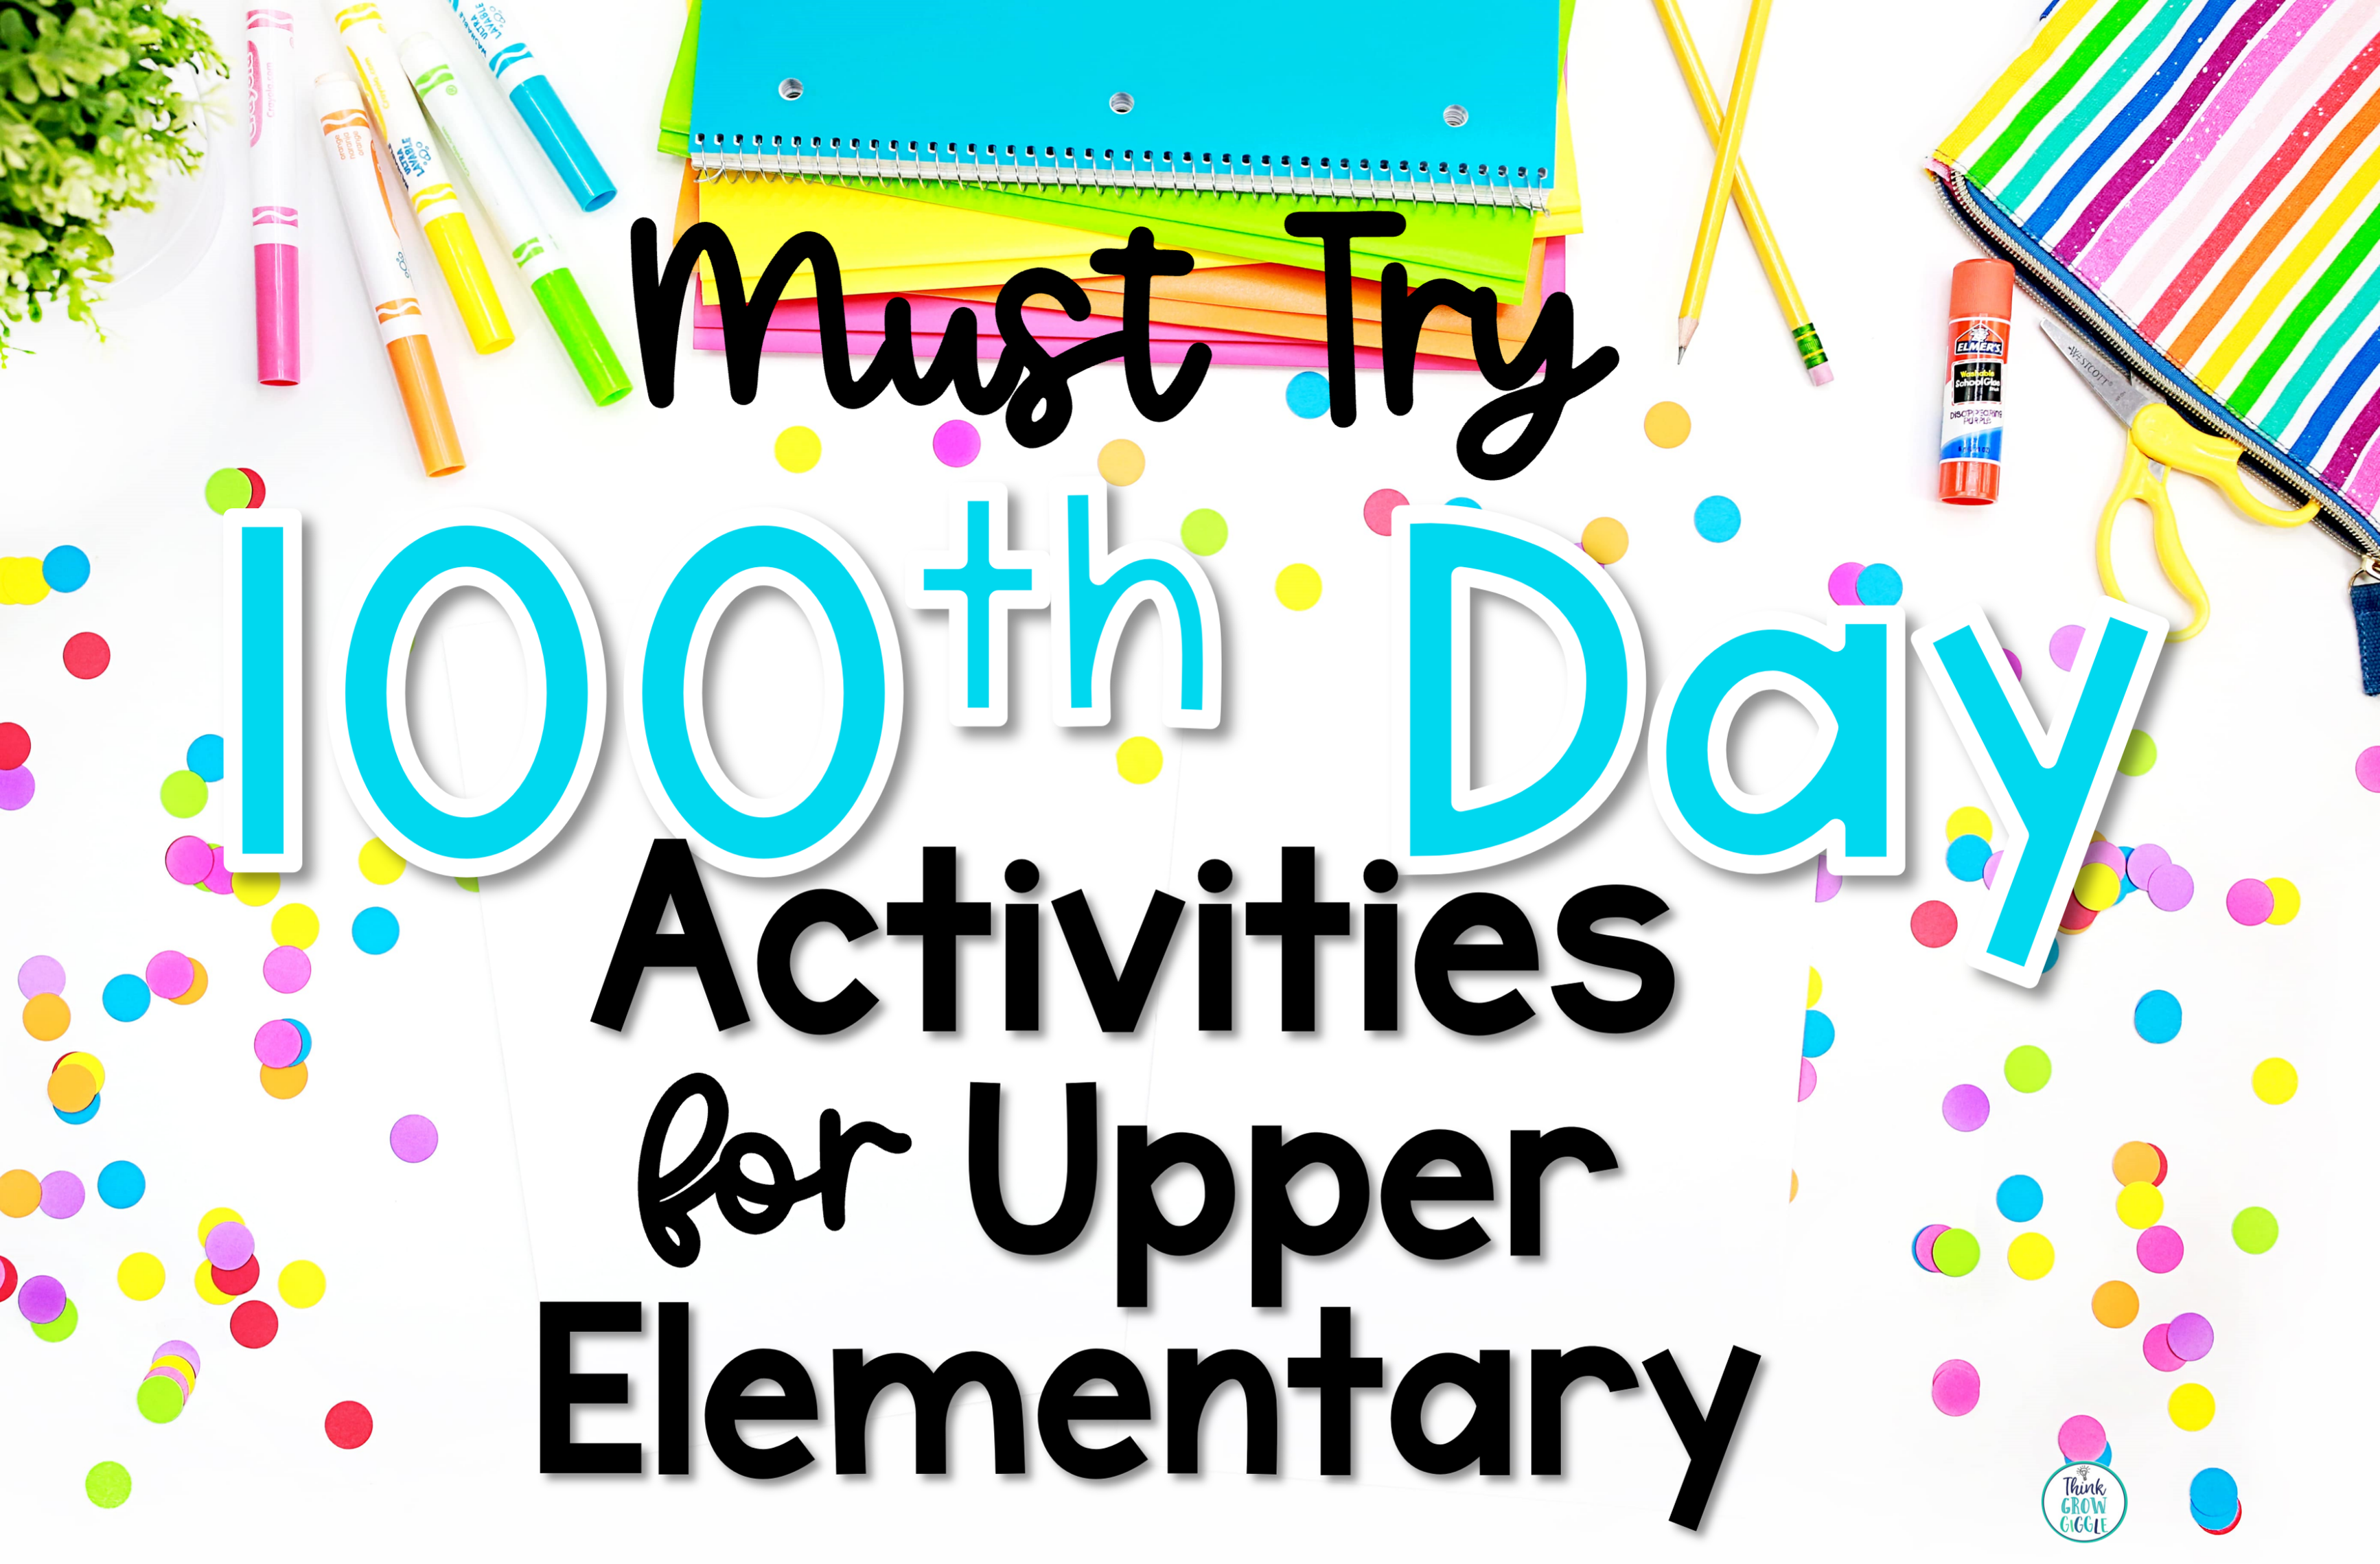 Activities to Celebrate the 100th Day of School for Upper Elementary